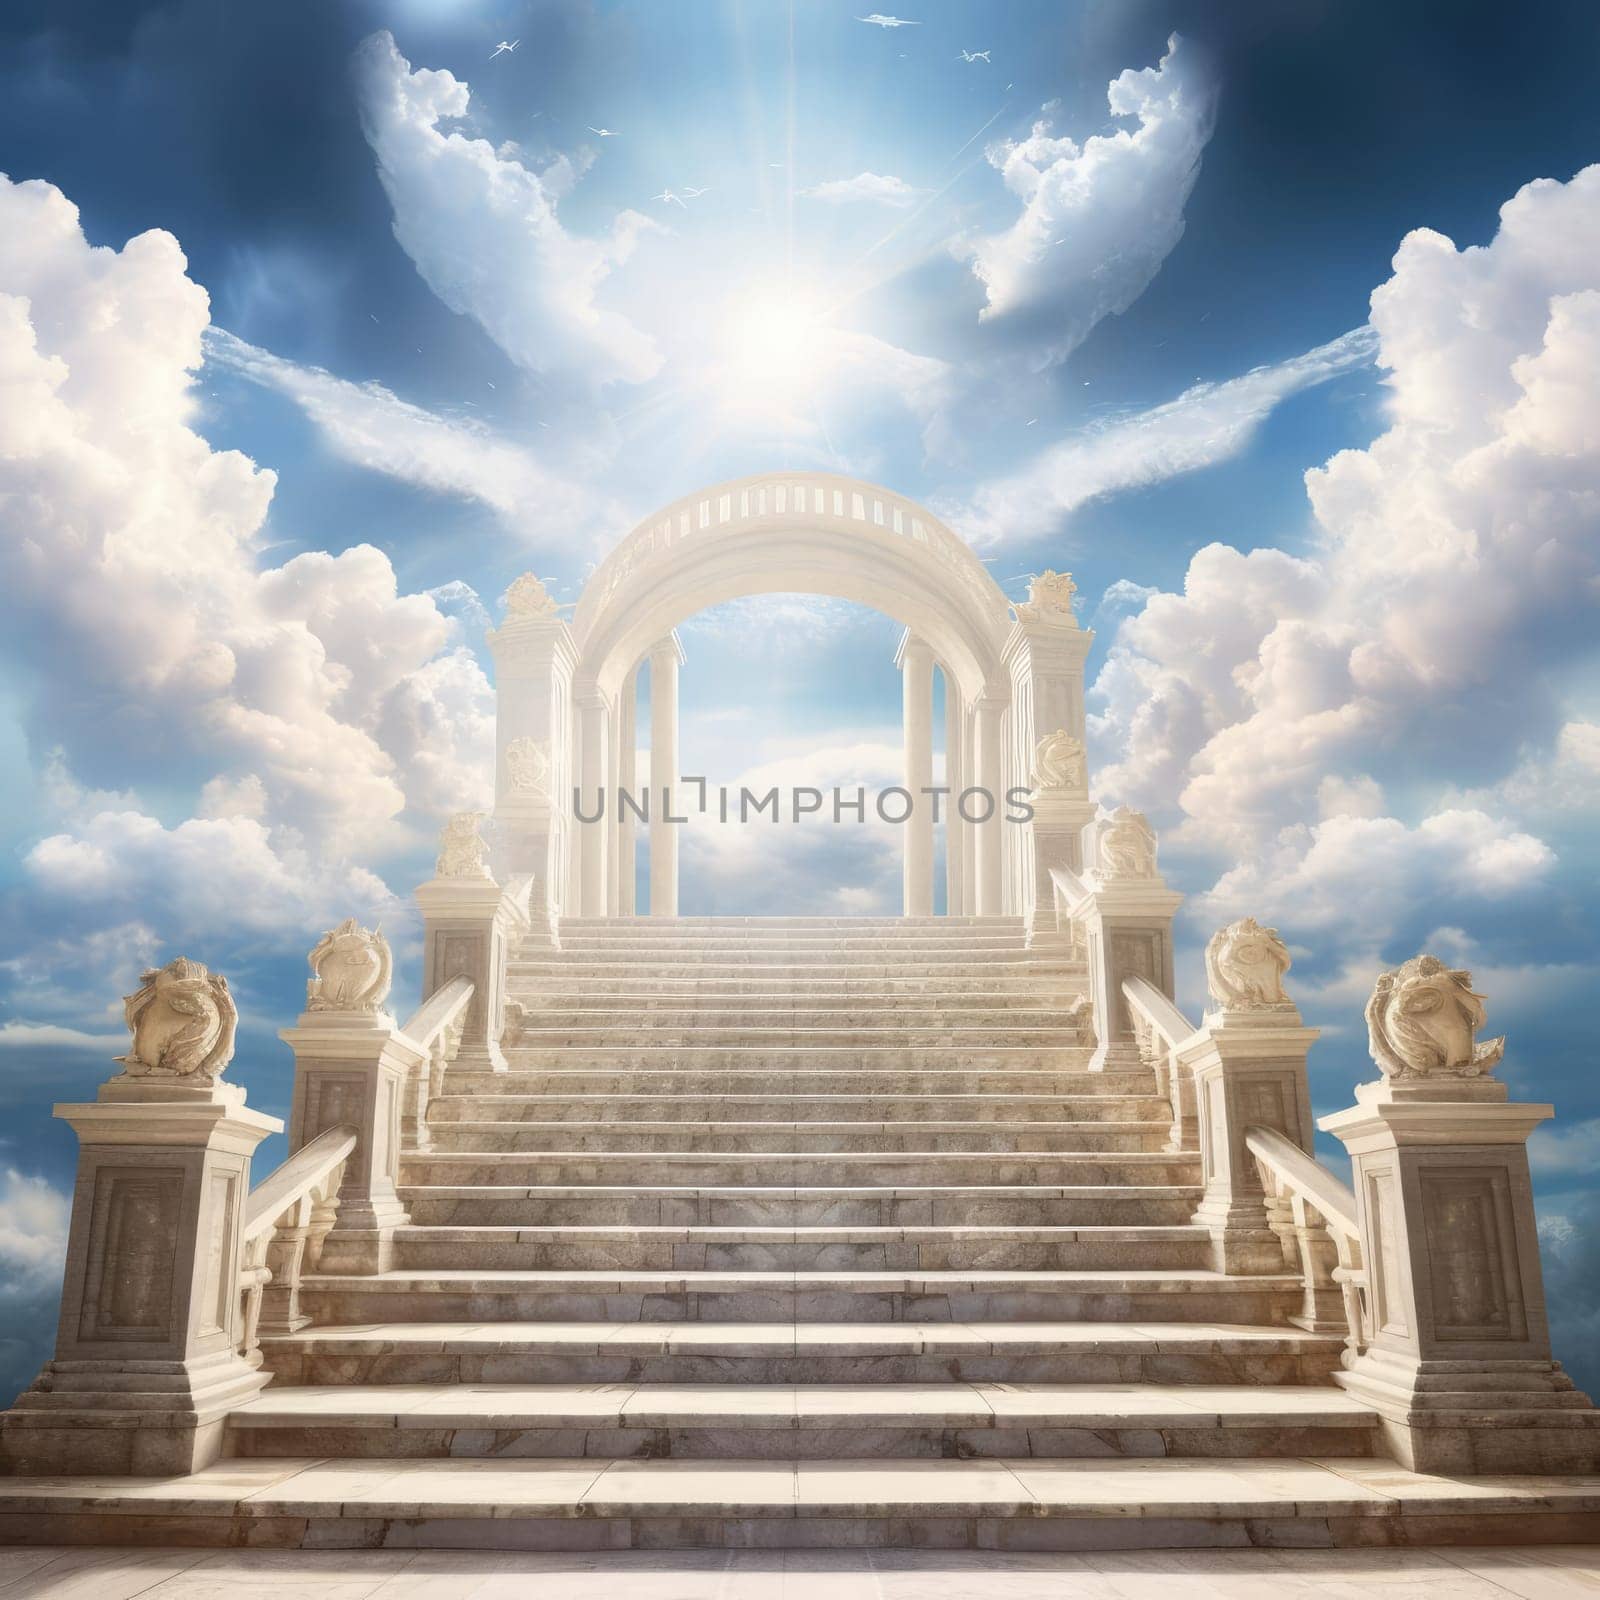 Stairway leading to heaven by cherezoff